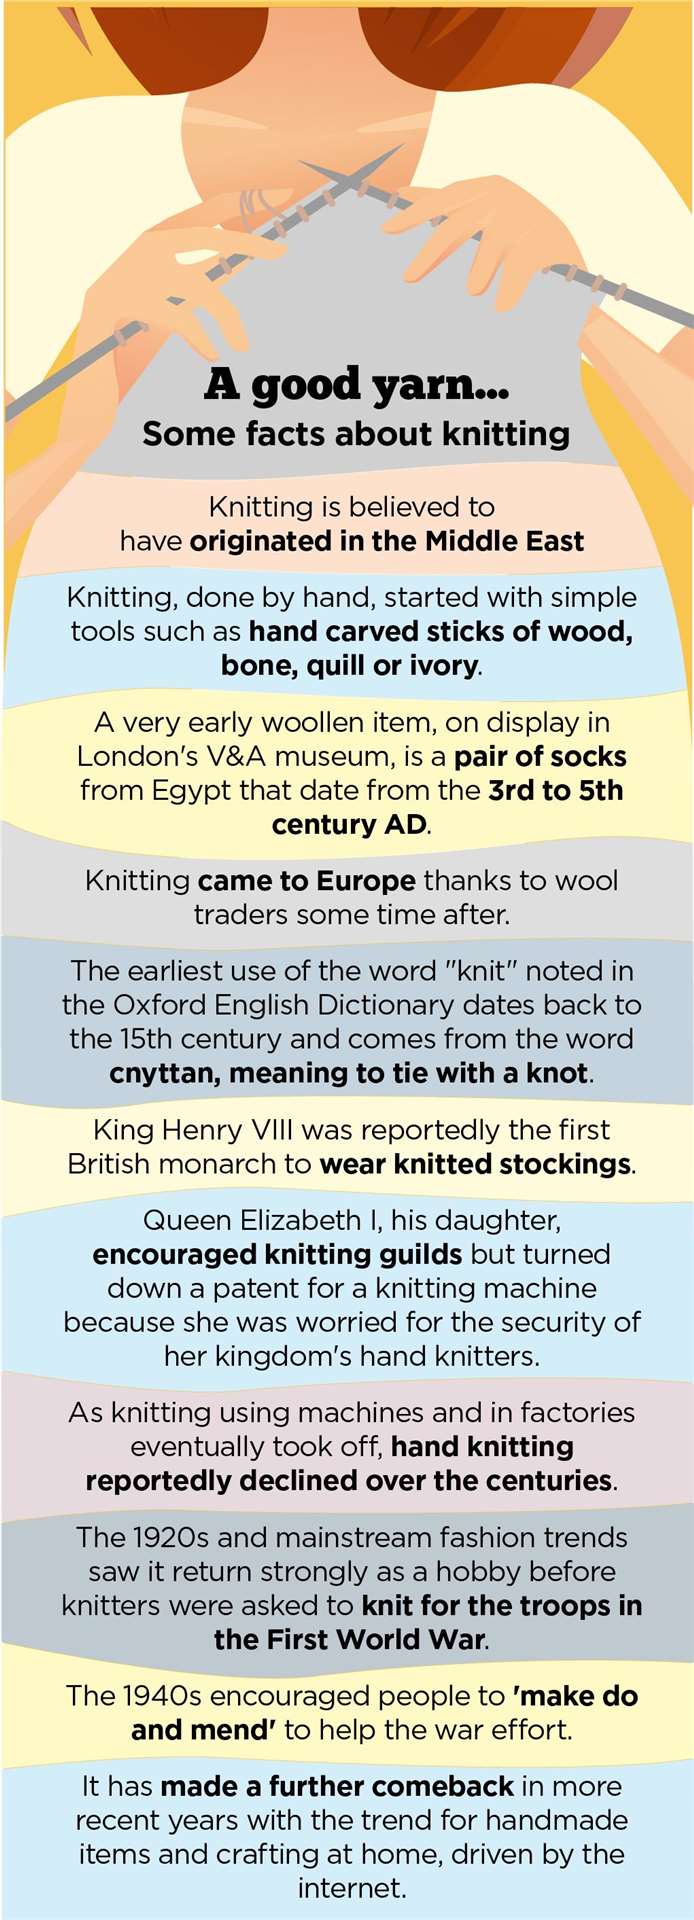 The history of knitting